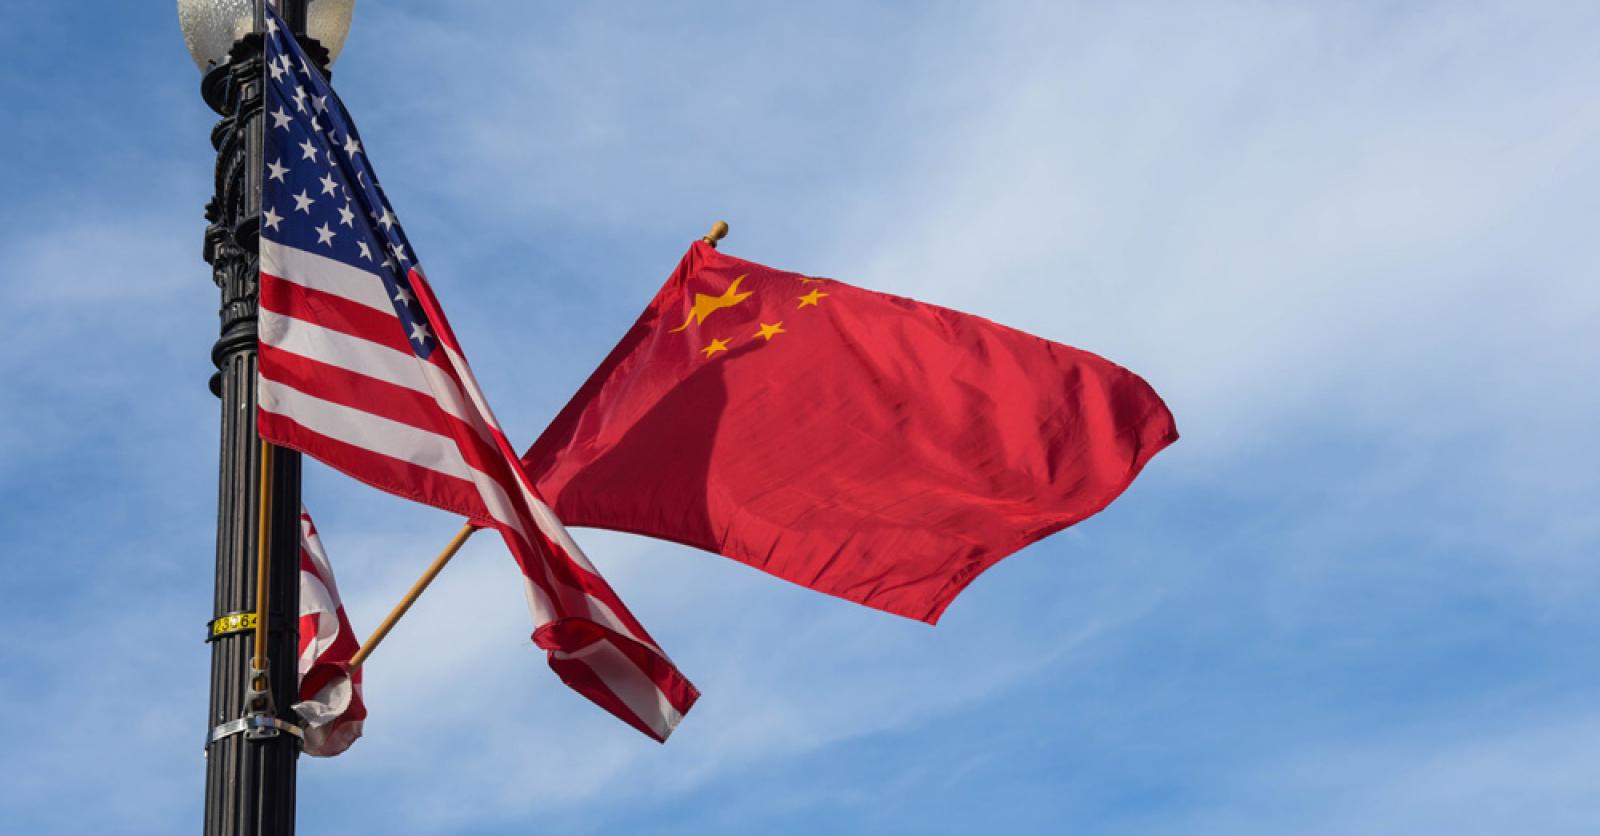 The US and UK impose sanctions on Chinese companies over cyberattacks